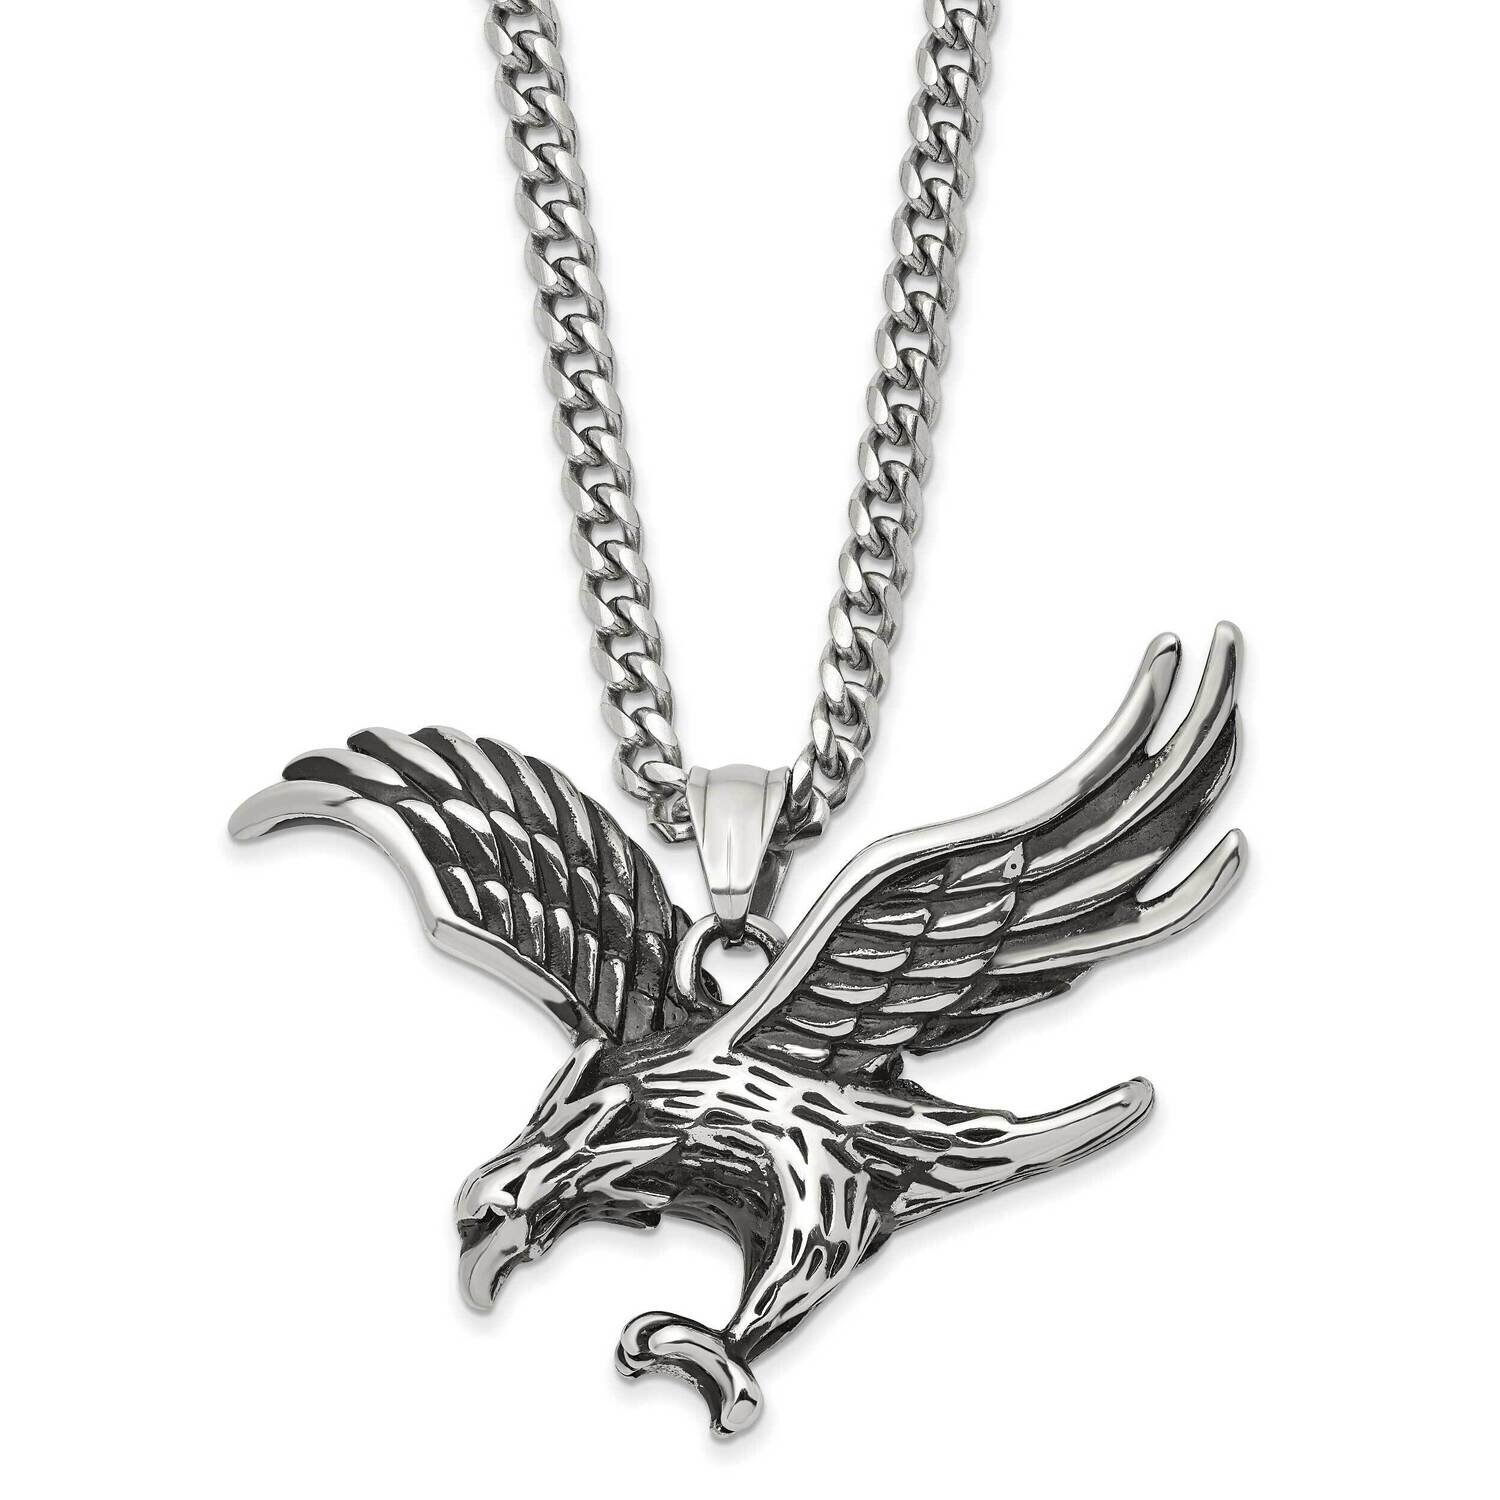 Antiqued and Polished Eagle 24 Inch Necklace Stainless Steel SRN2844-24